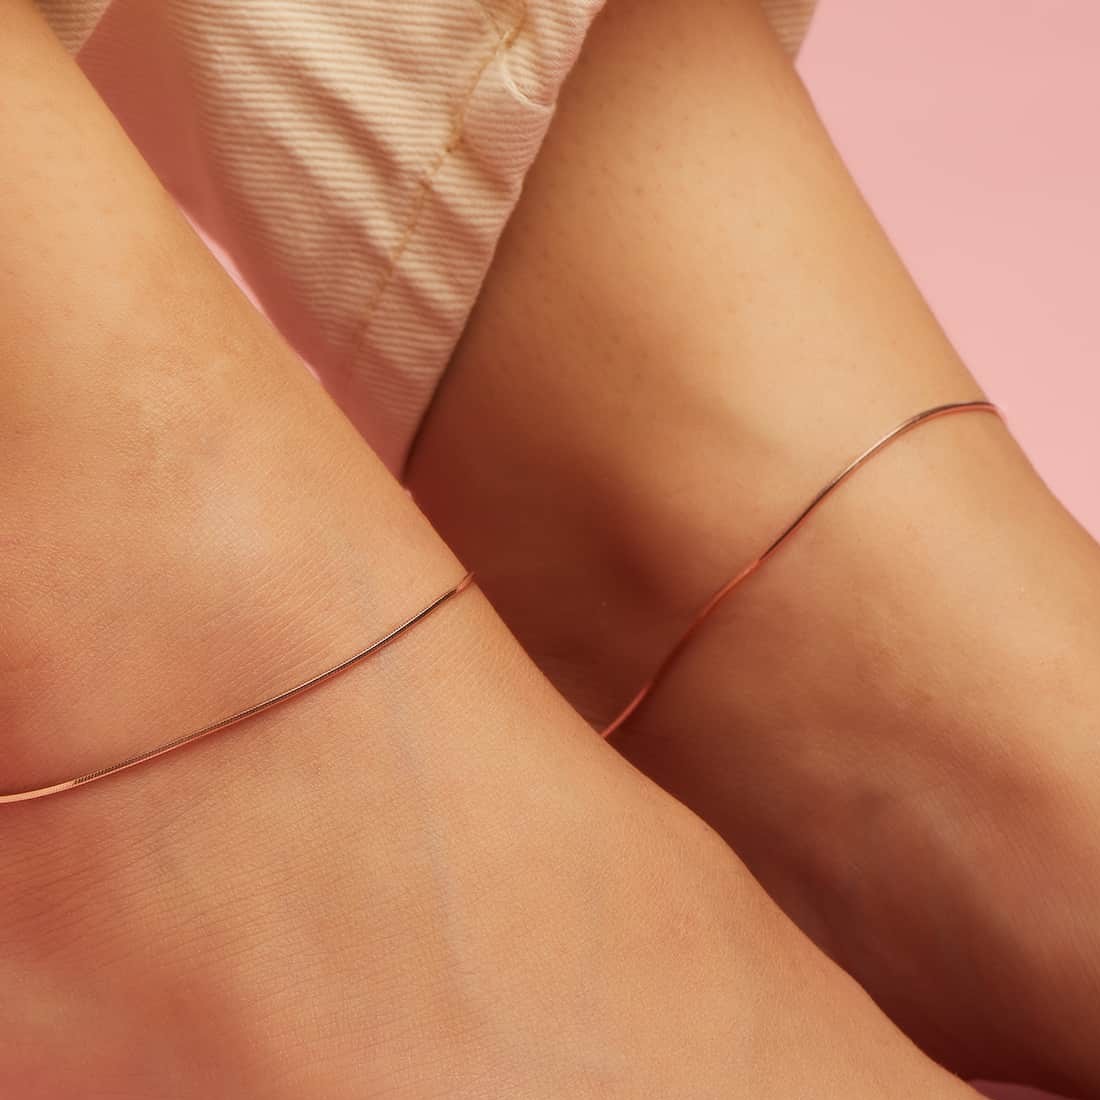 Minimal Chain 925 Sterling Silver Anklet In Rose Gold